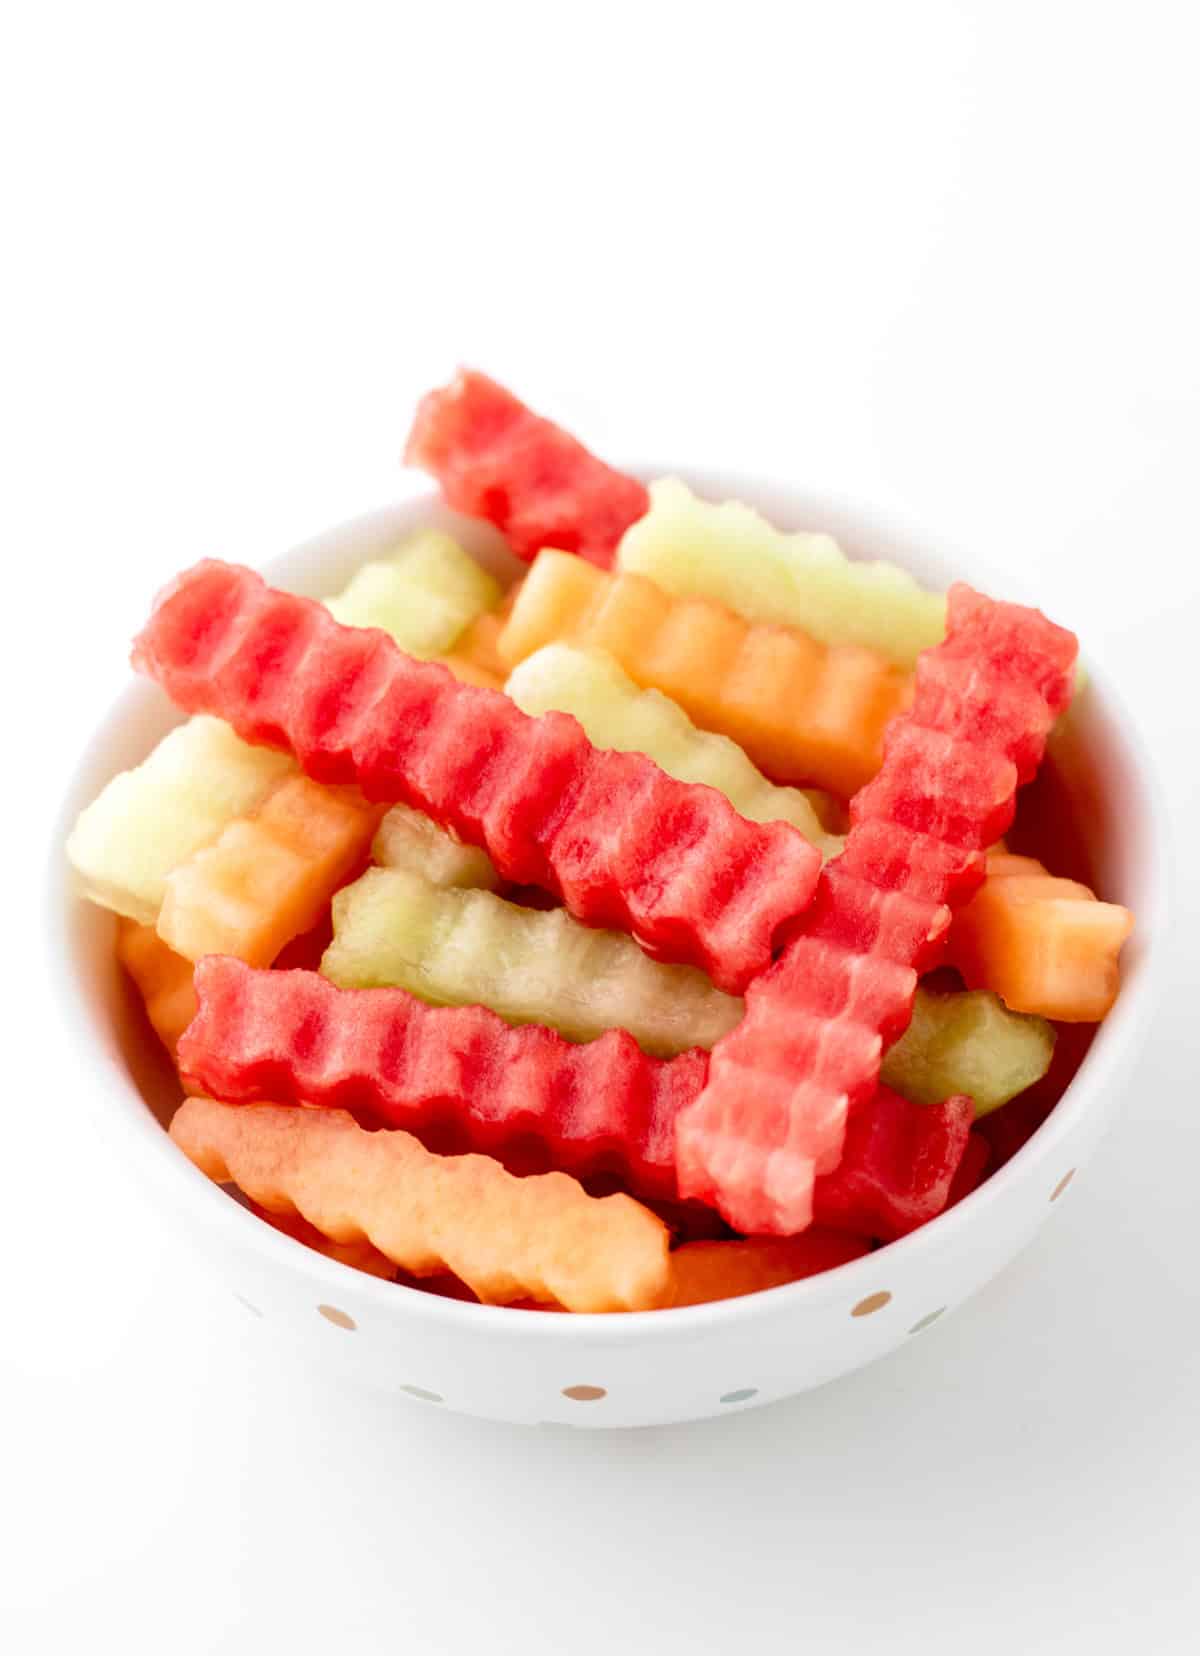 Fruit fries stacked on top of each other in a white bowl.